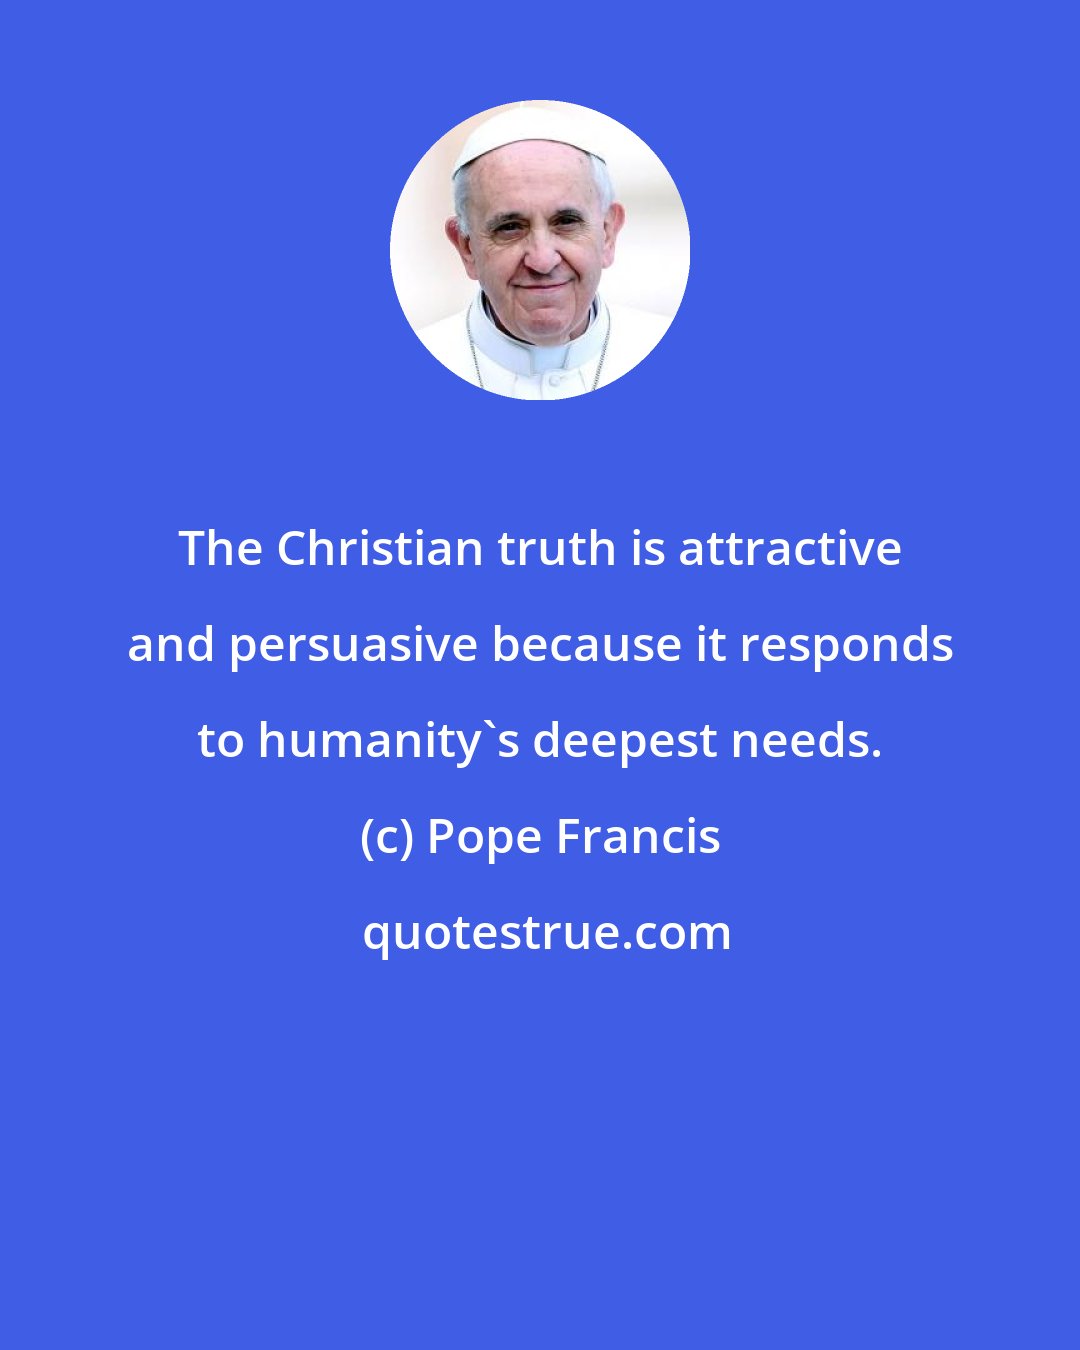 Pope Francis: The Christian truth is attractive and persuasive because it responds to humanity's deepest needs.